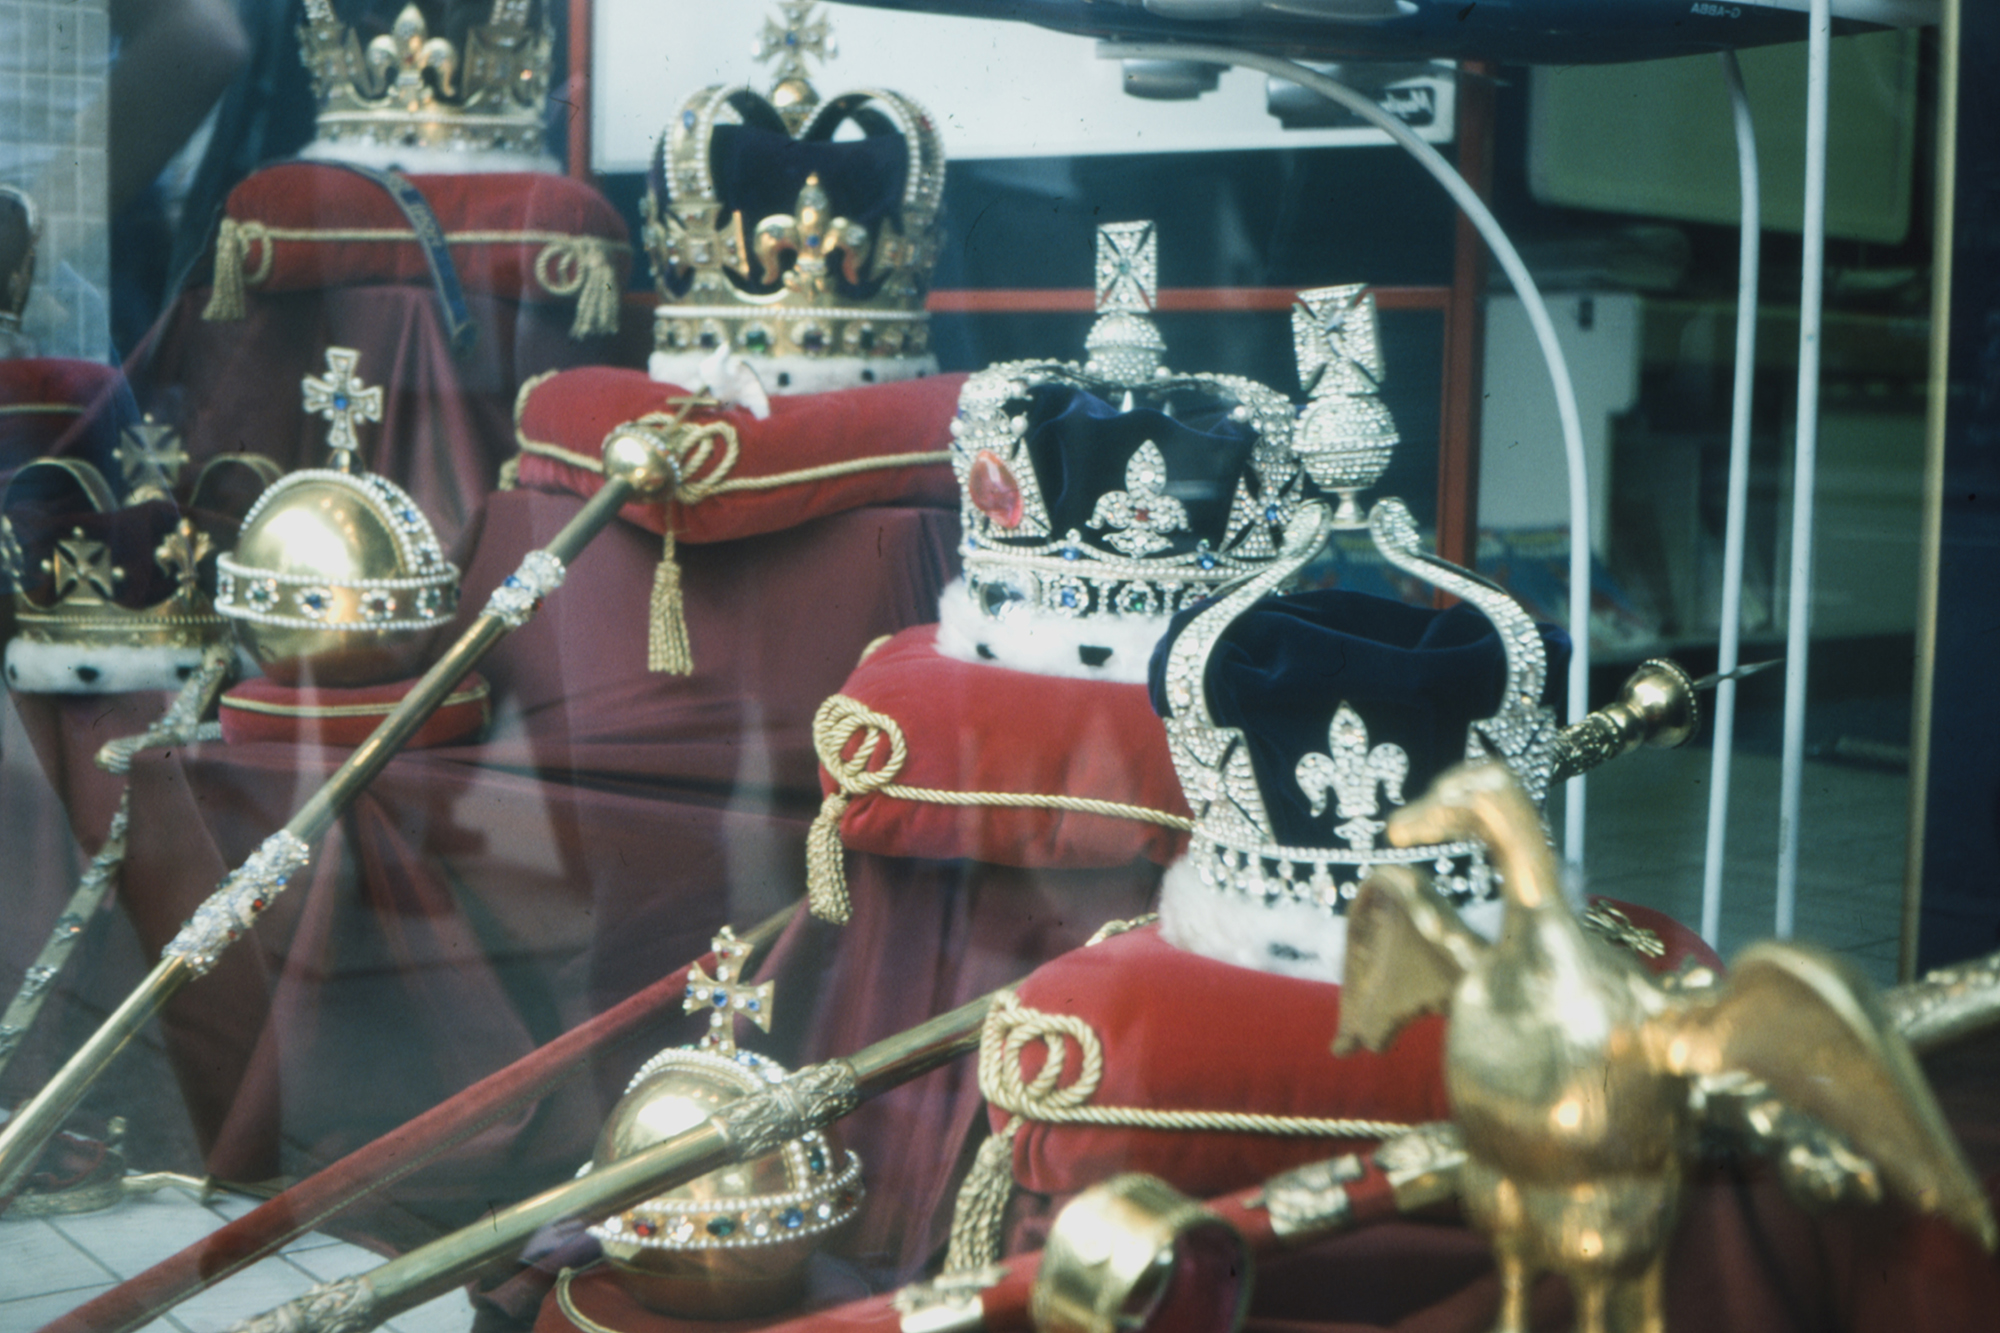 Store window display on The Stand, London, to celebrate the Marriage of Prince Charles and Princess Diana, 1981.